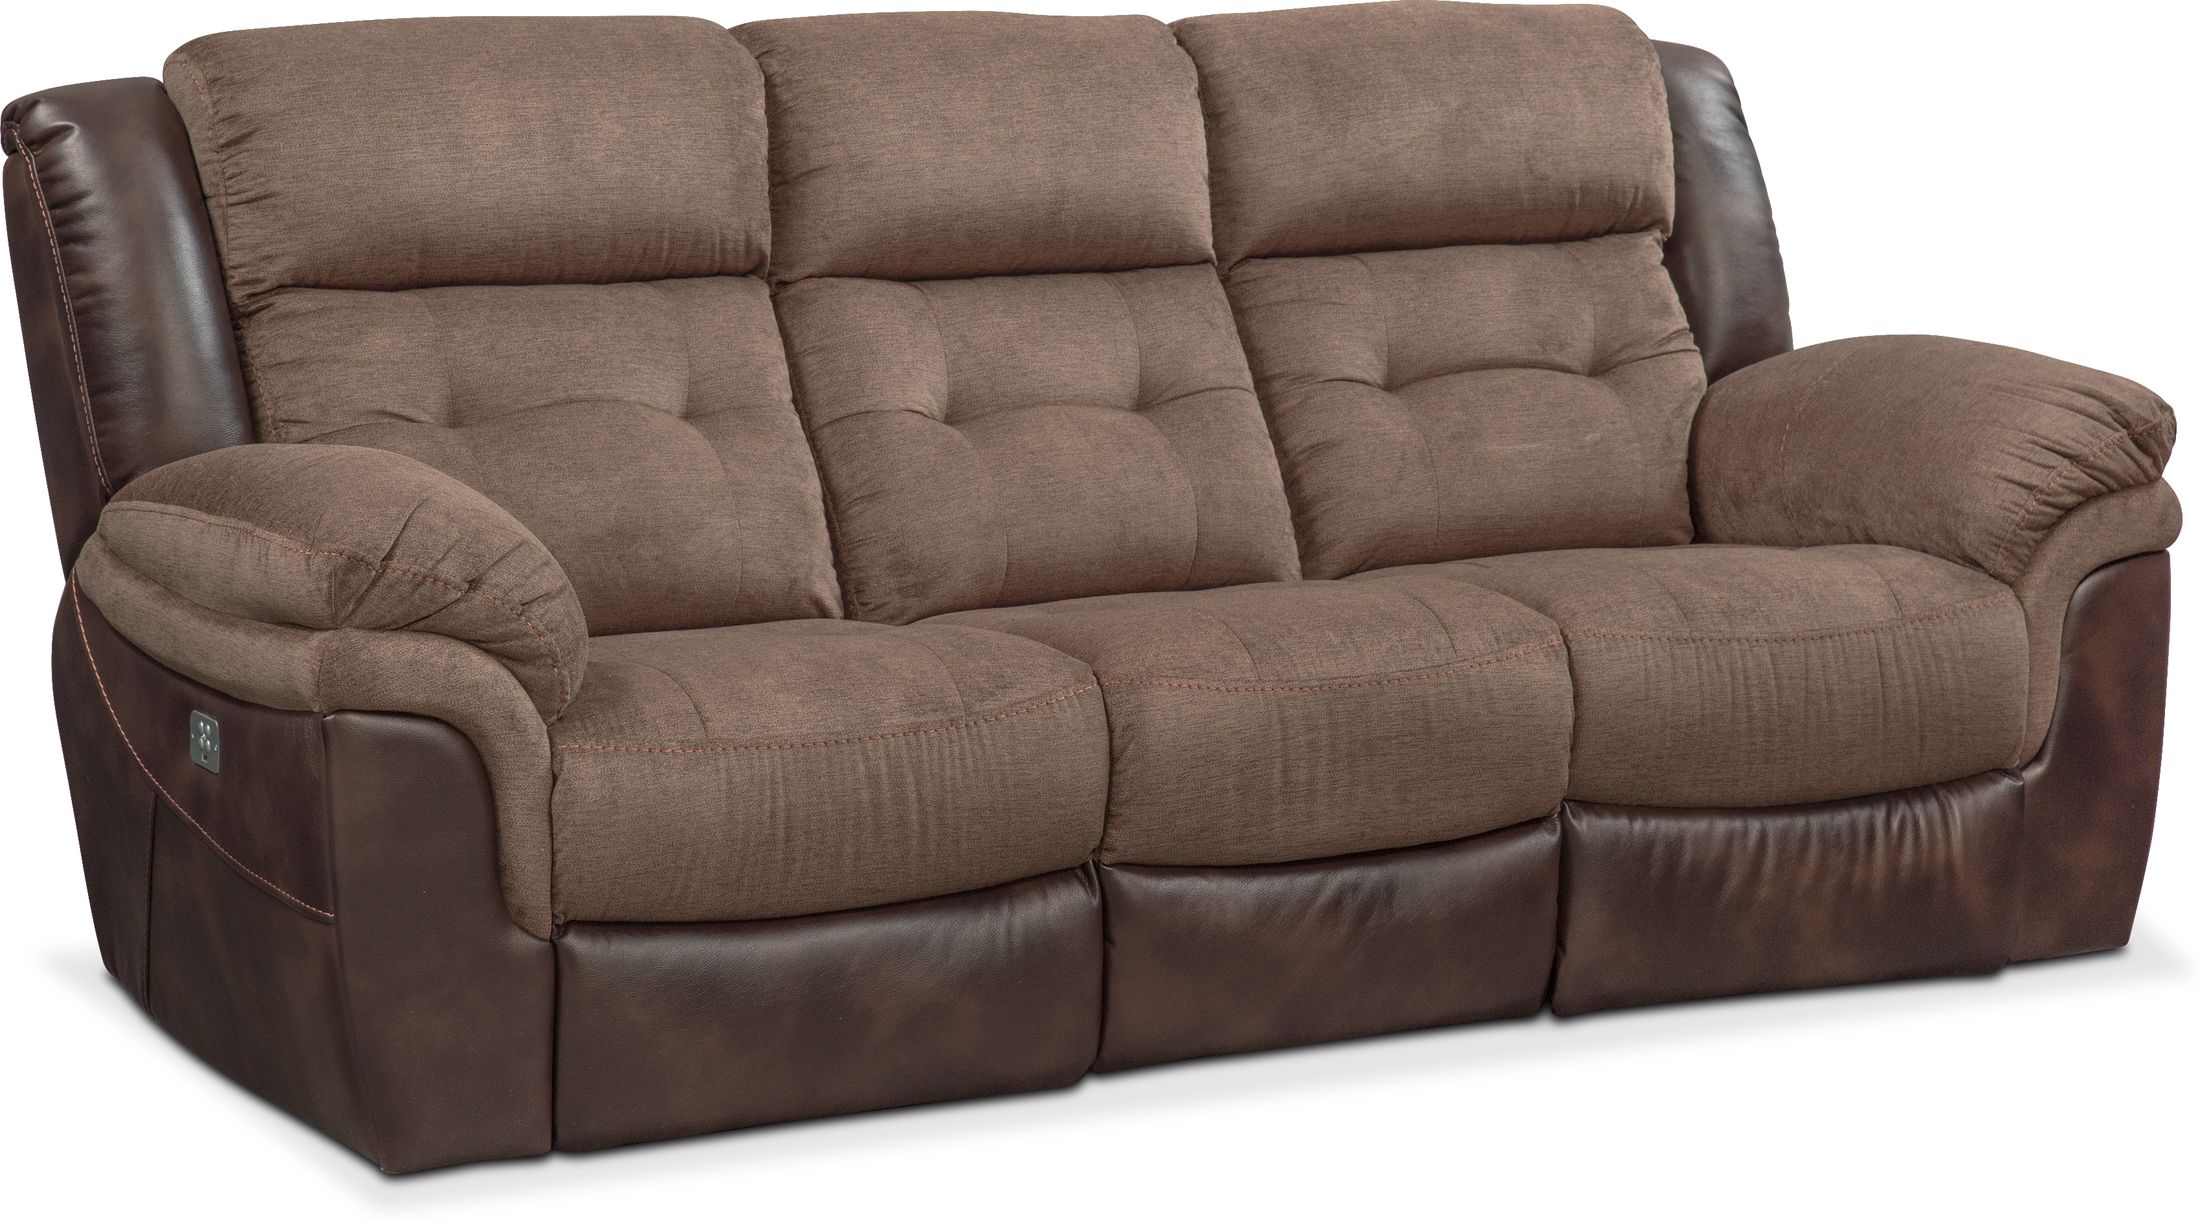 value city leather power recliner sofa